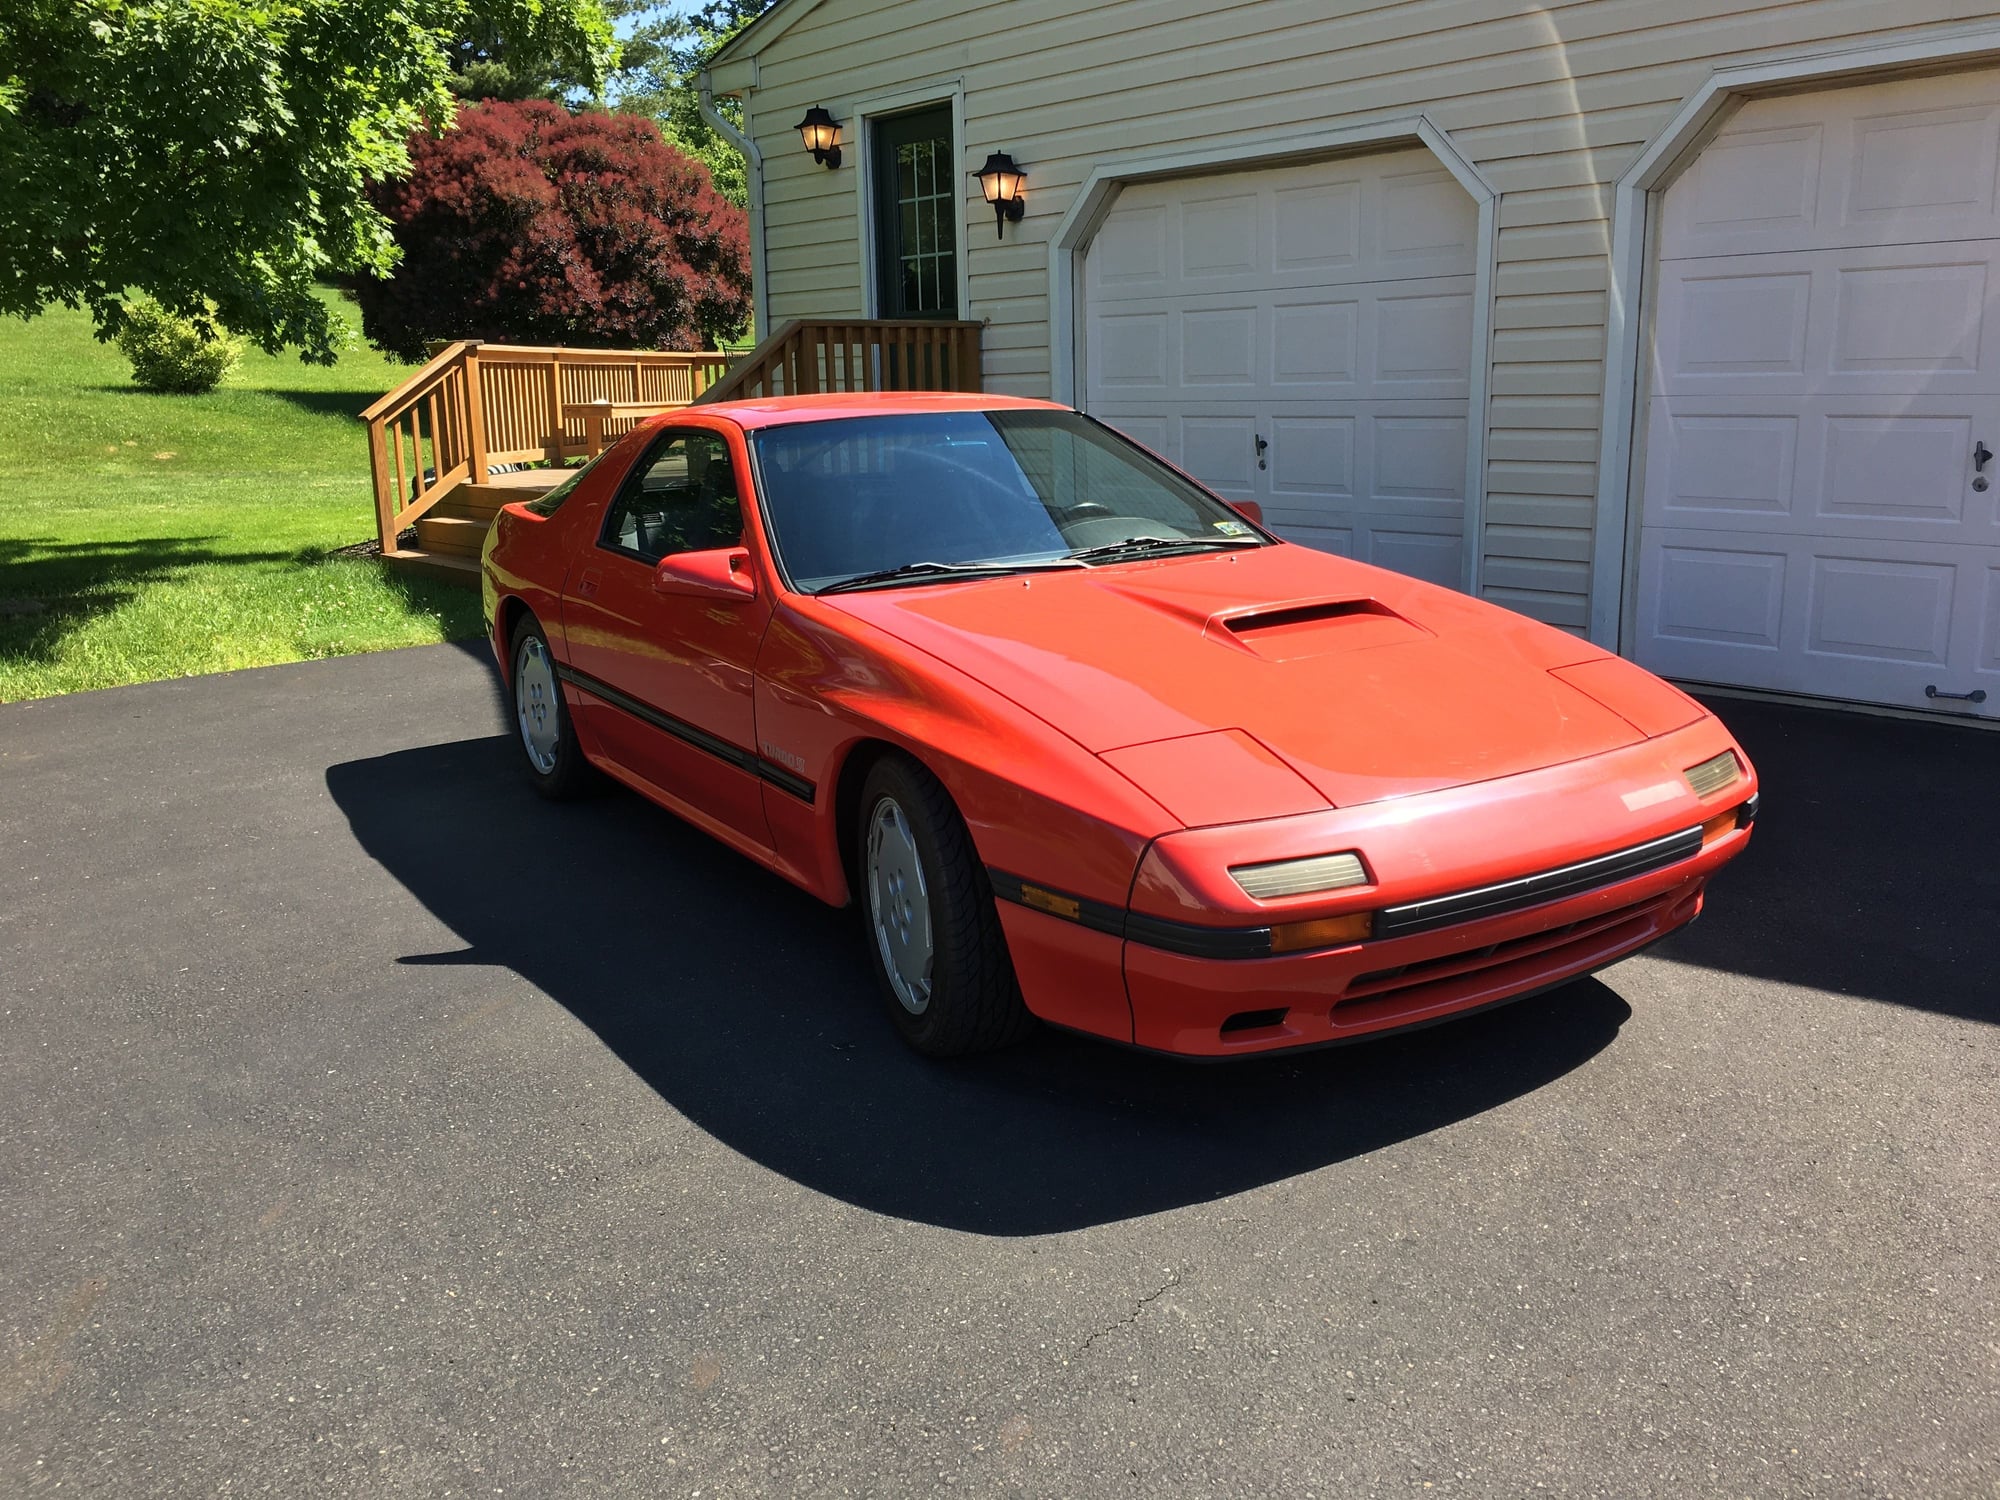 1987 Mazda RX-7 - 1987 Mazda RX-7 Turbo II - Used - VIN JM1FC3322H0537478 - 90,000 Miles - Other - 2WD - Manual - Coupe - Red - Doylestown, PA 18902, United States